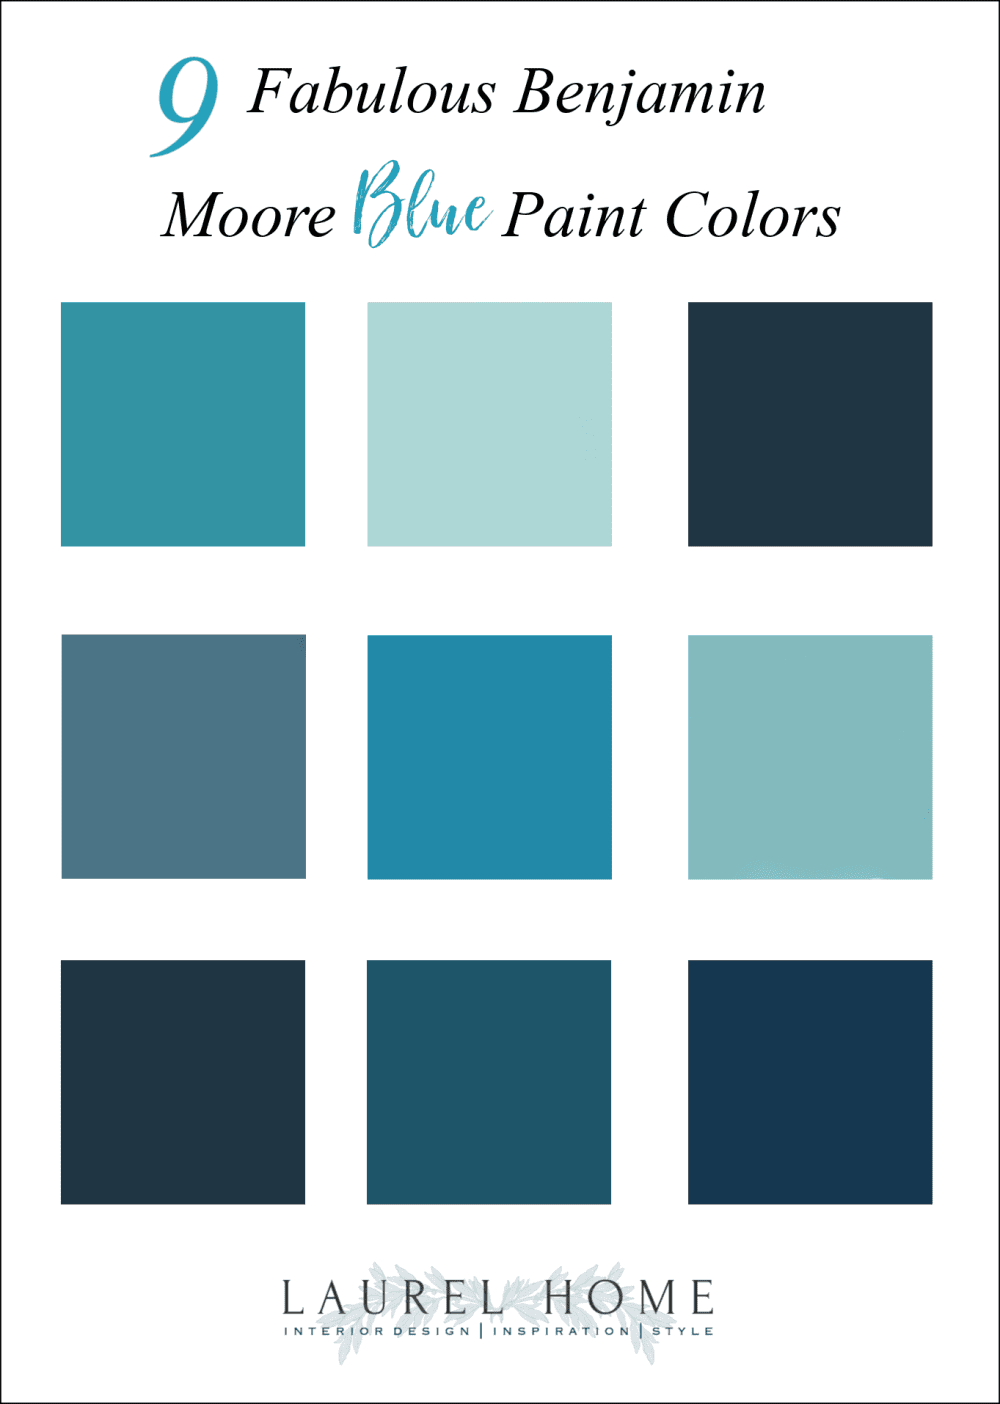 9 gorgeous shades of Benjamin Moore blue paint colors